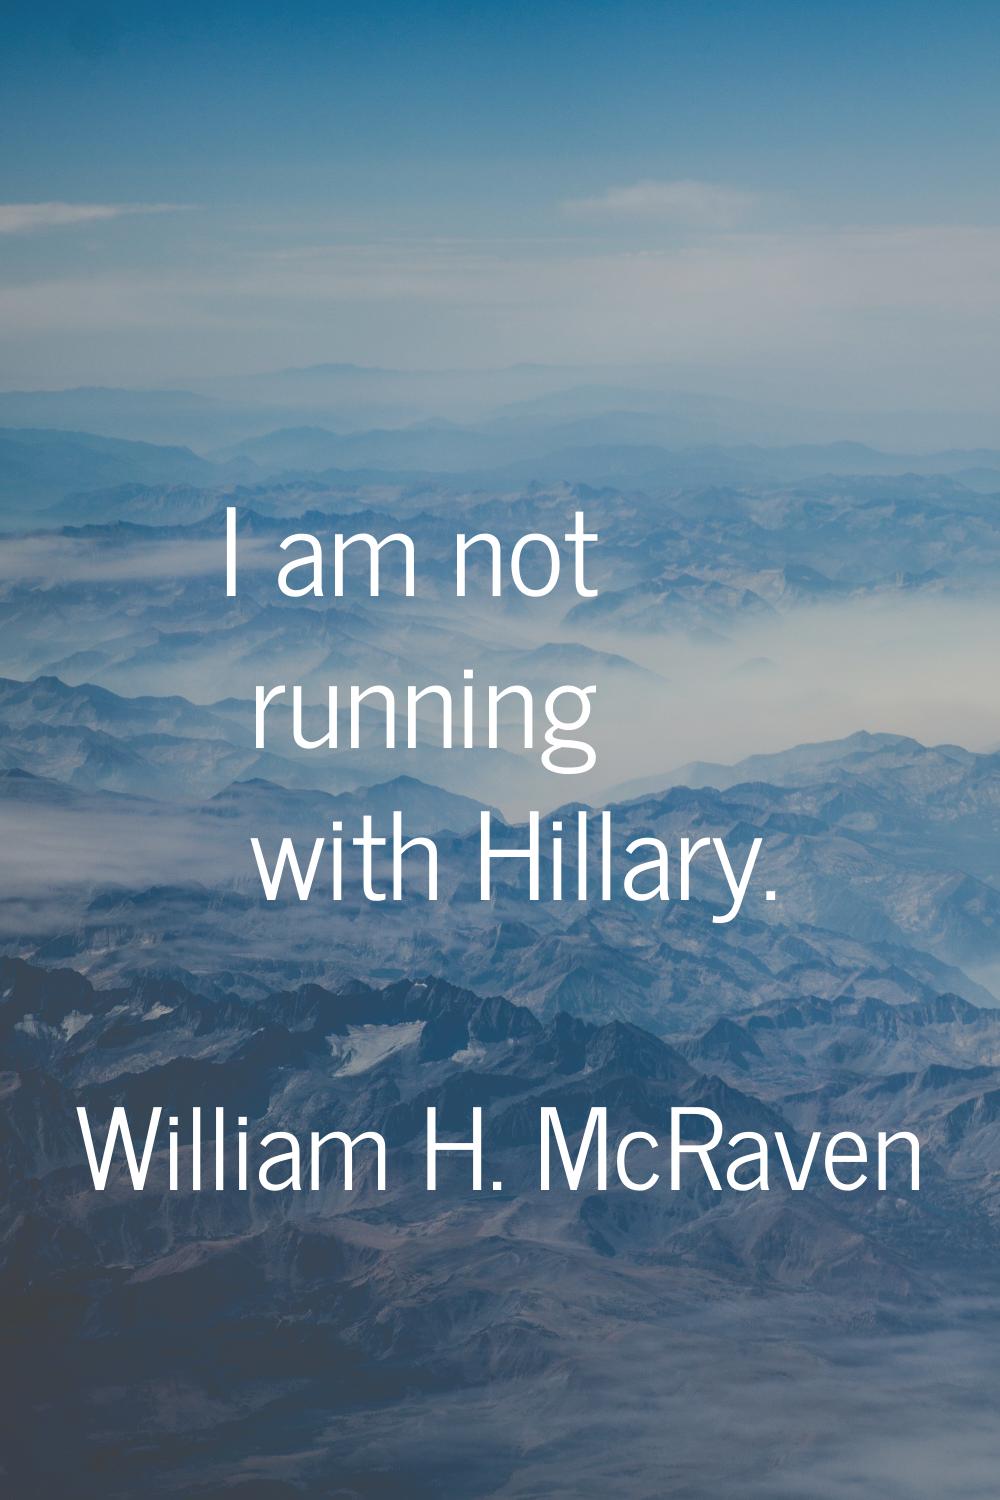 I am not running with Hillary.